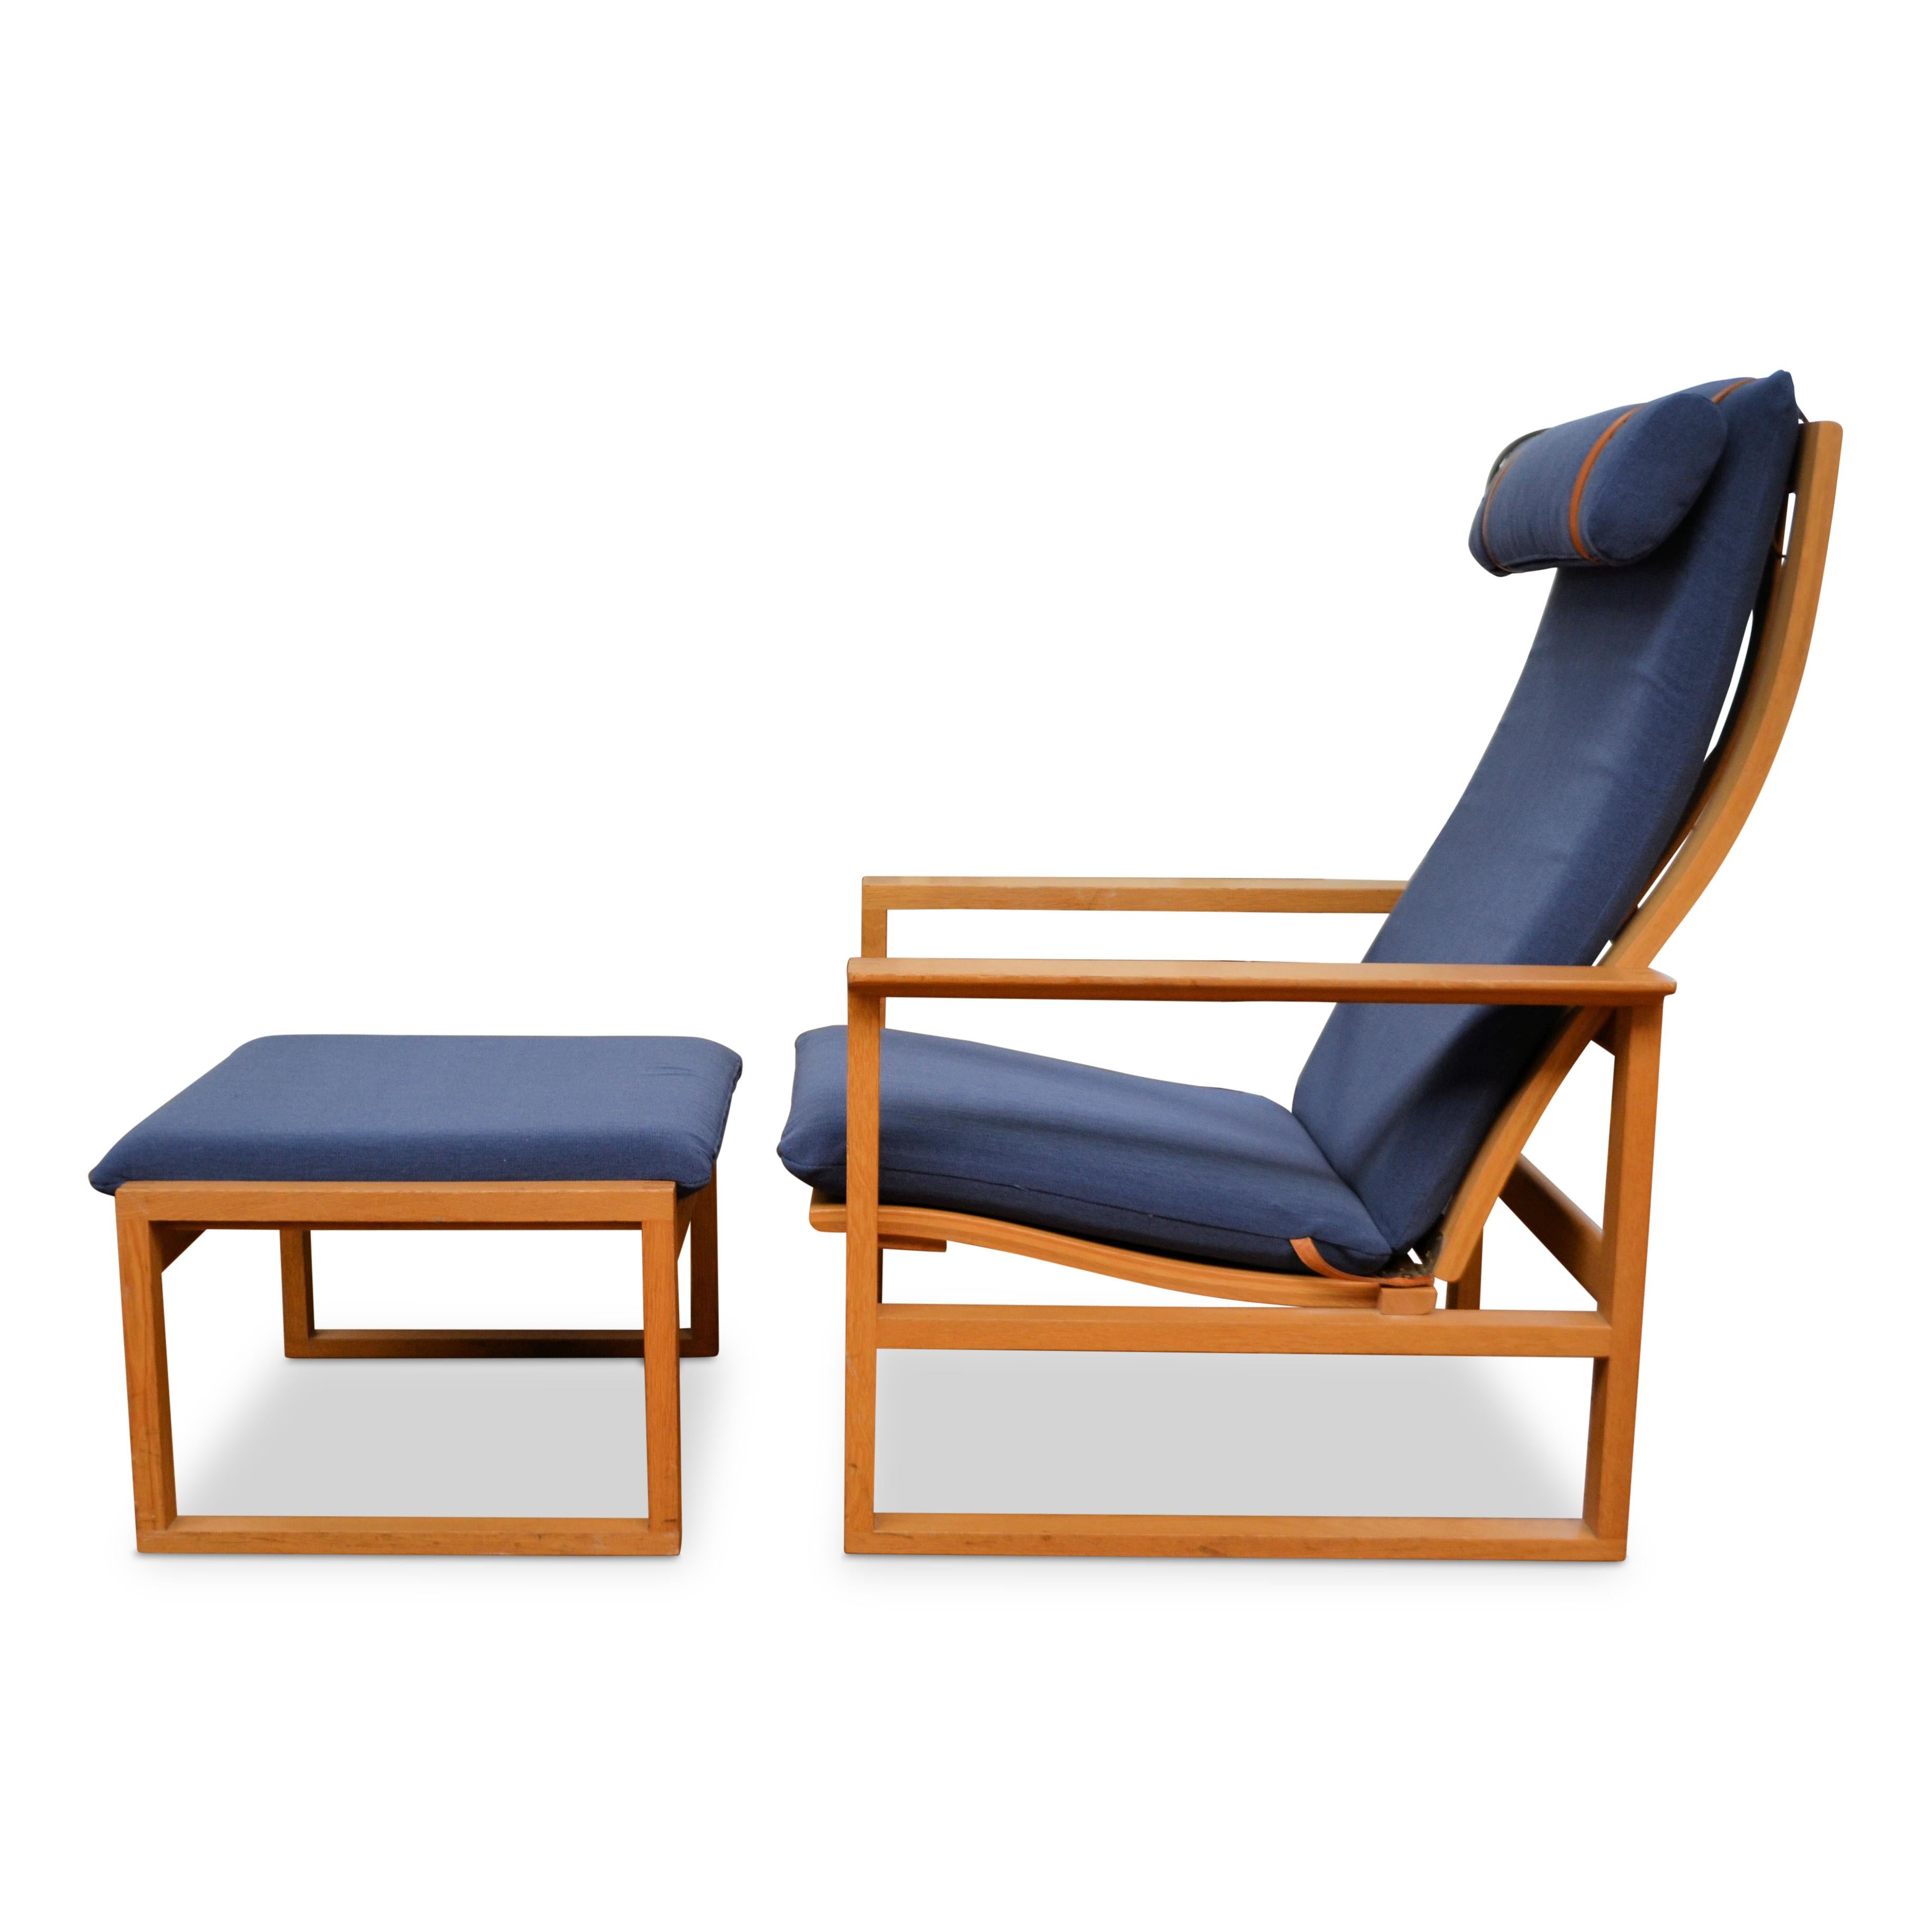 Vintage Danish lounge chair model 2254 and matching ottoman model 2248 designed by worldwide known and appreciated furniture designer Børge Mogensen for manufacturer Fredericia. Mogensen was one of the most important among a generation of furniture